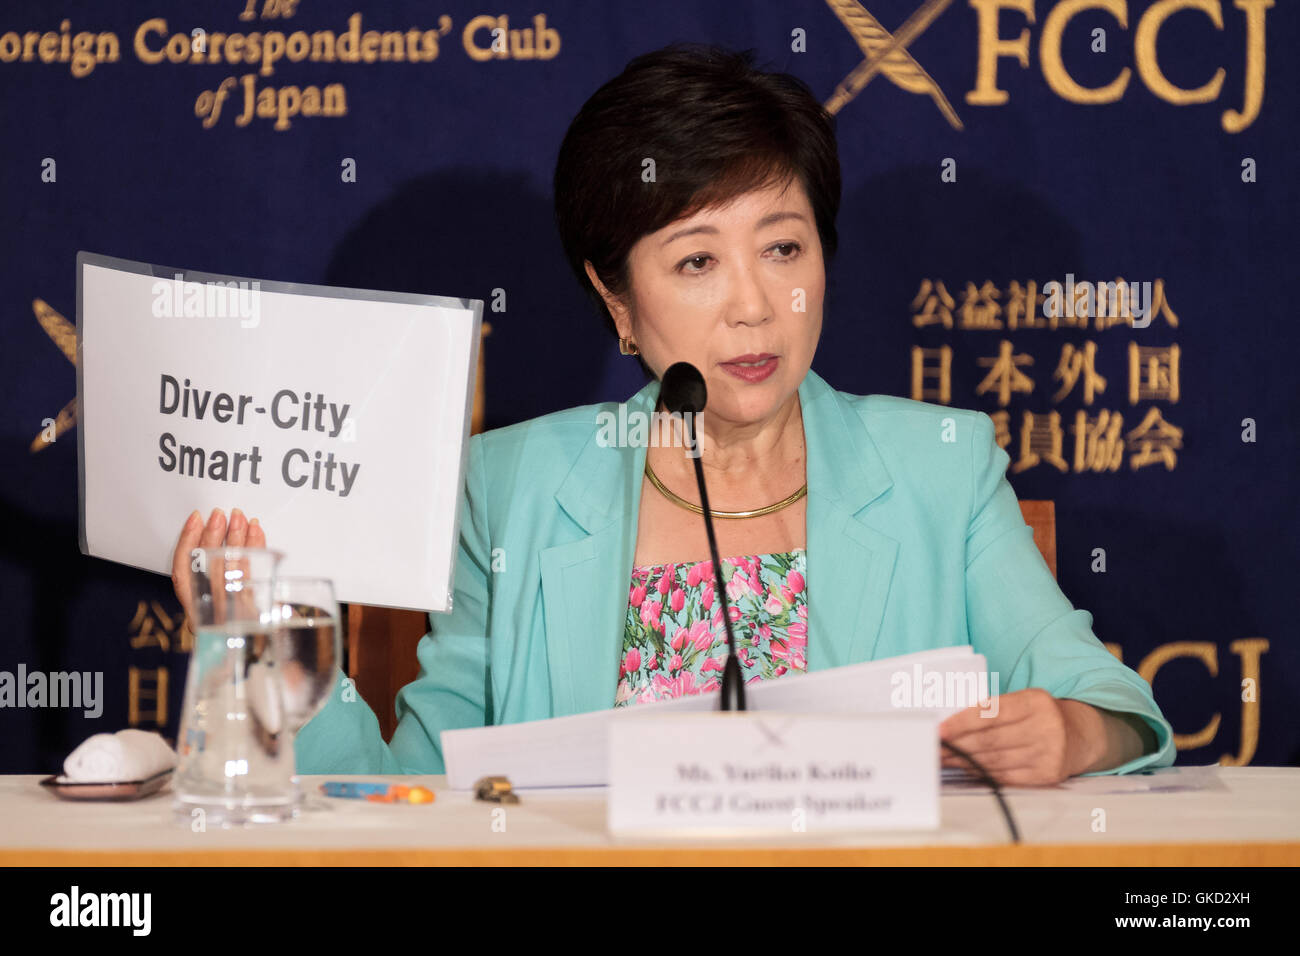 Yuriko Koike, a politician with the ruling Liberal Democratic Party (LDP) gives a press conference at the Foreign Correspondents Stock Photo